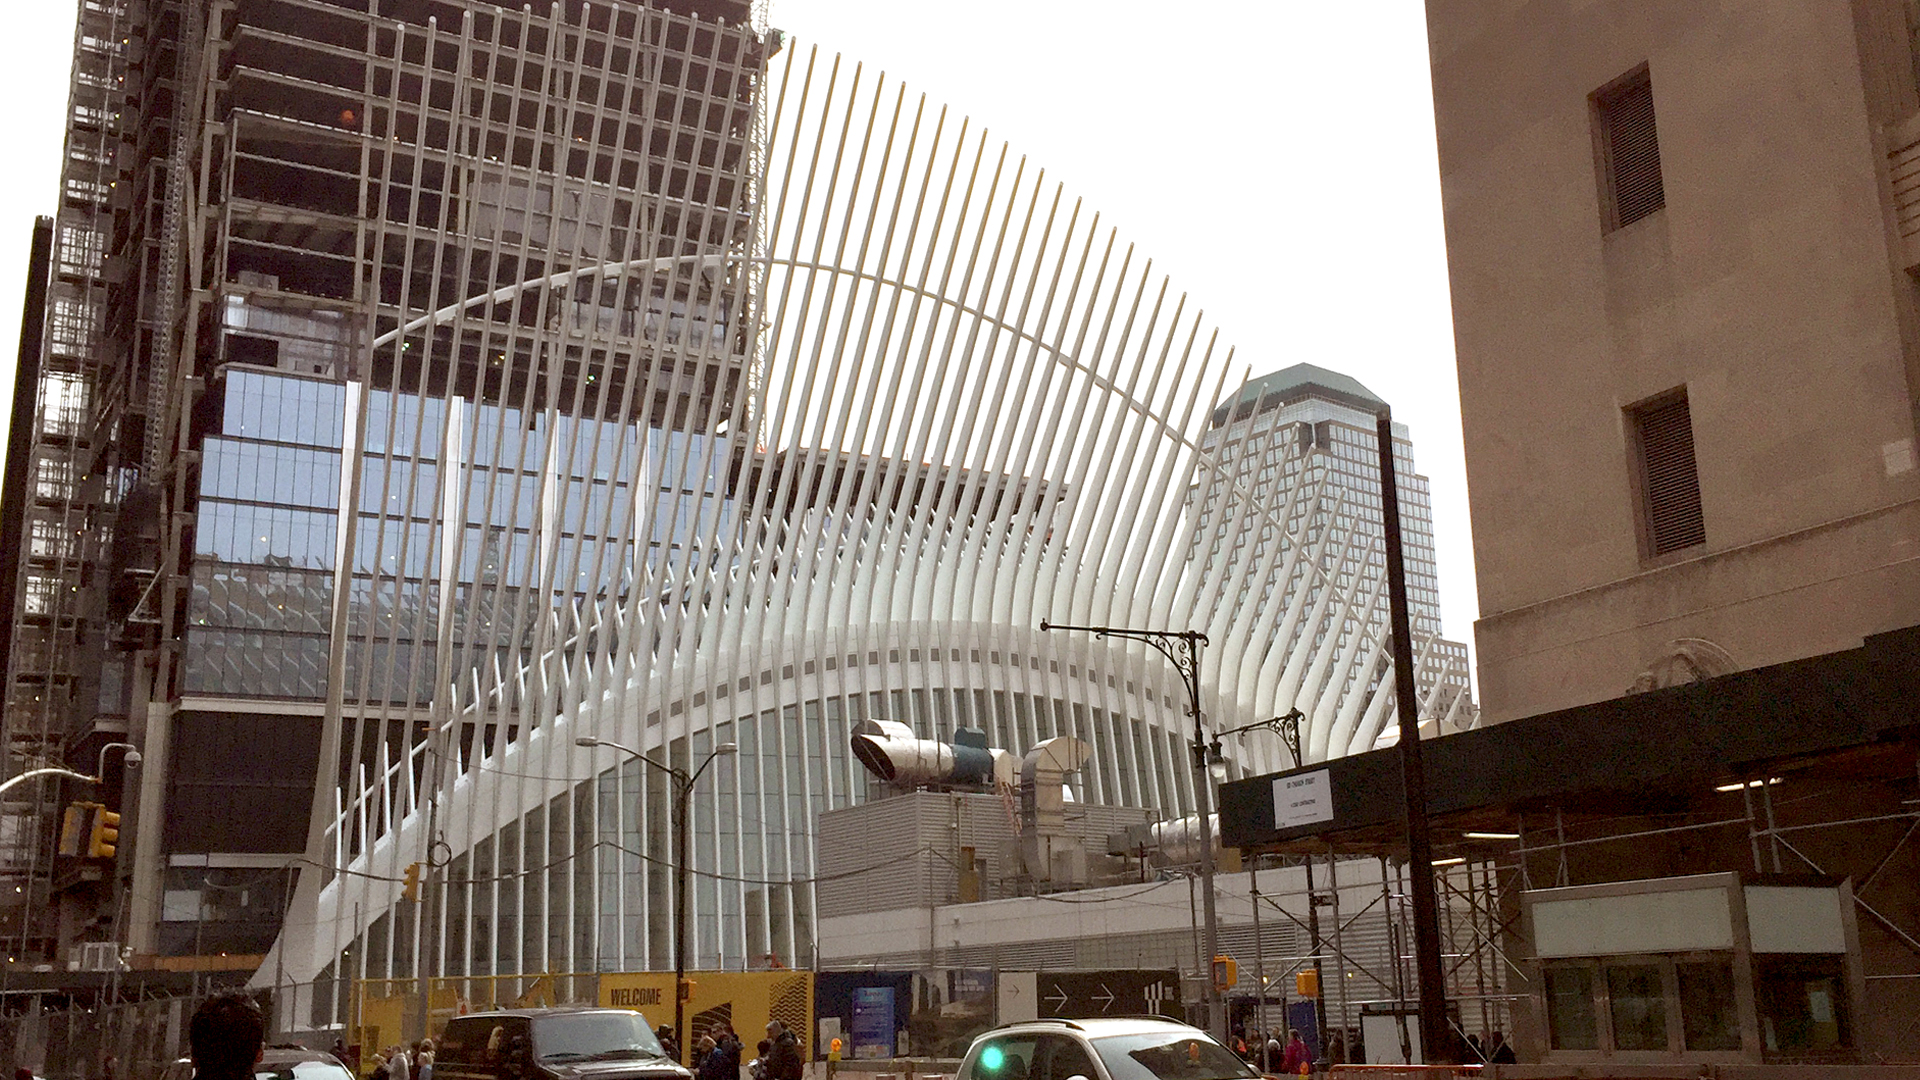 Oculus in Financial district exterior from Street view